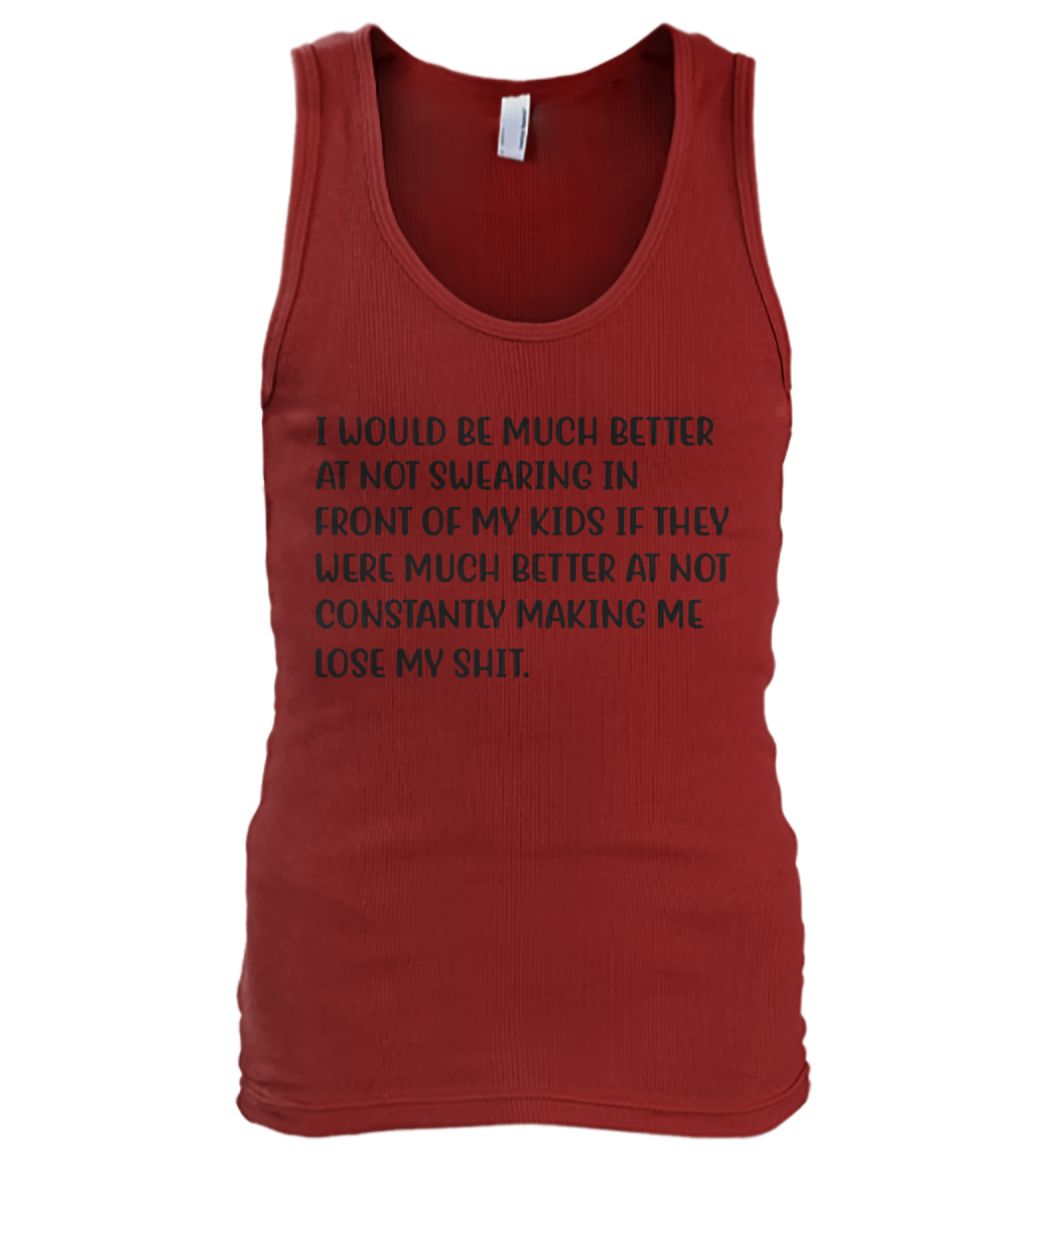 I would be much better at not swearing in front of my kids men's tank top